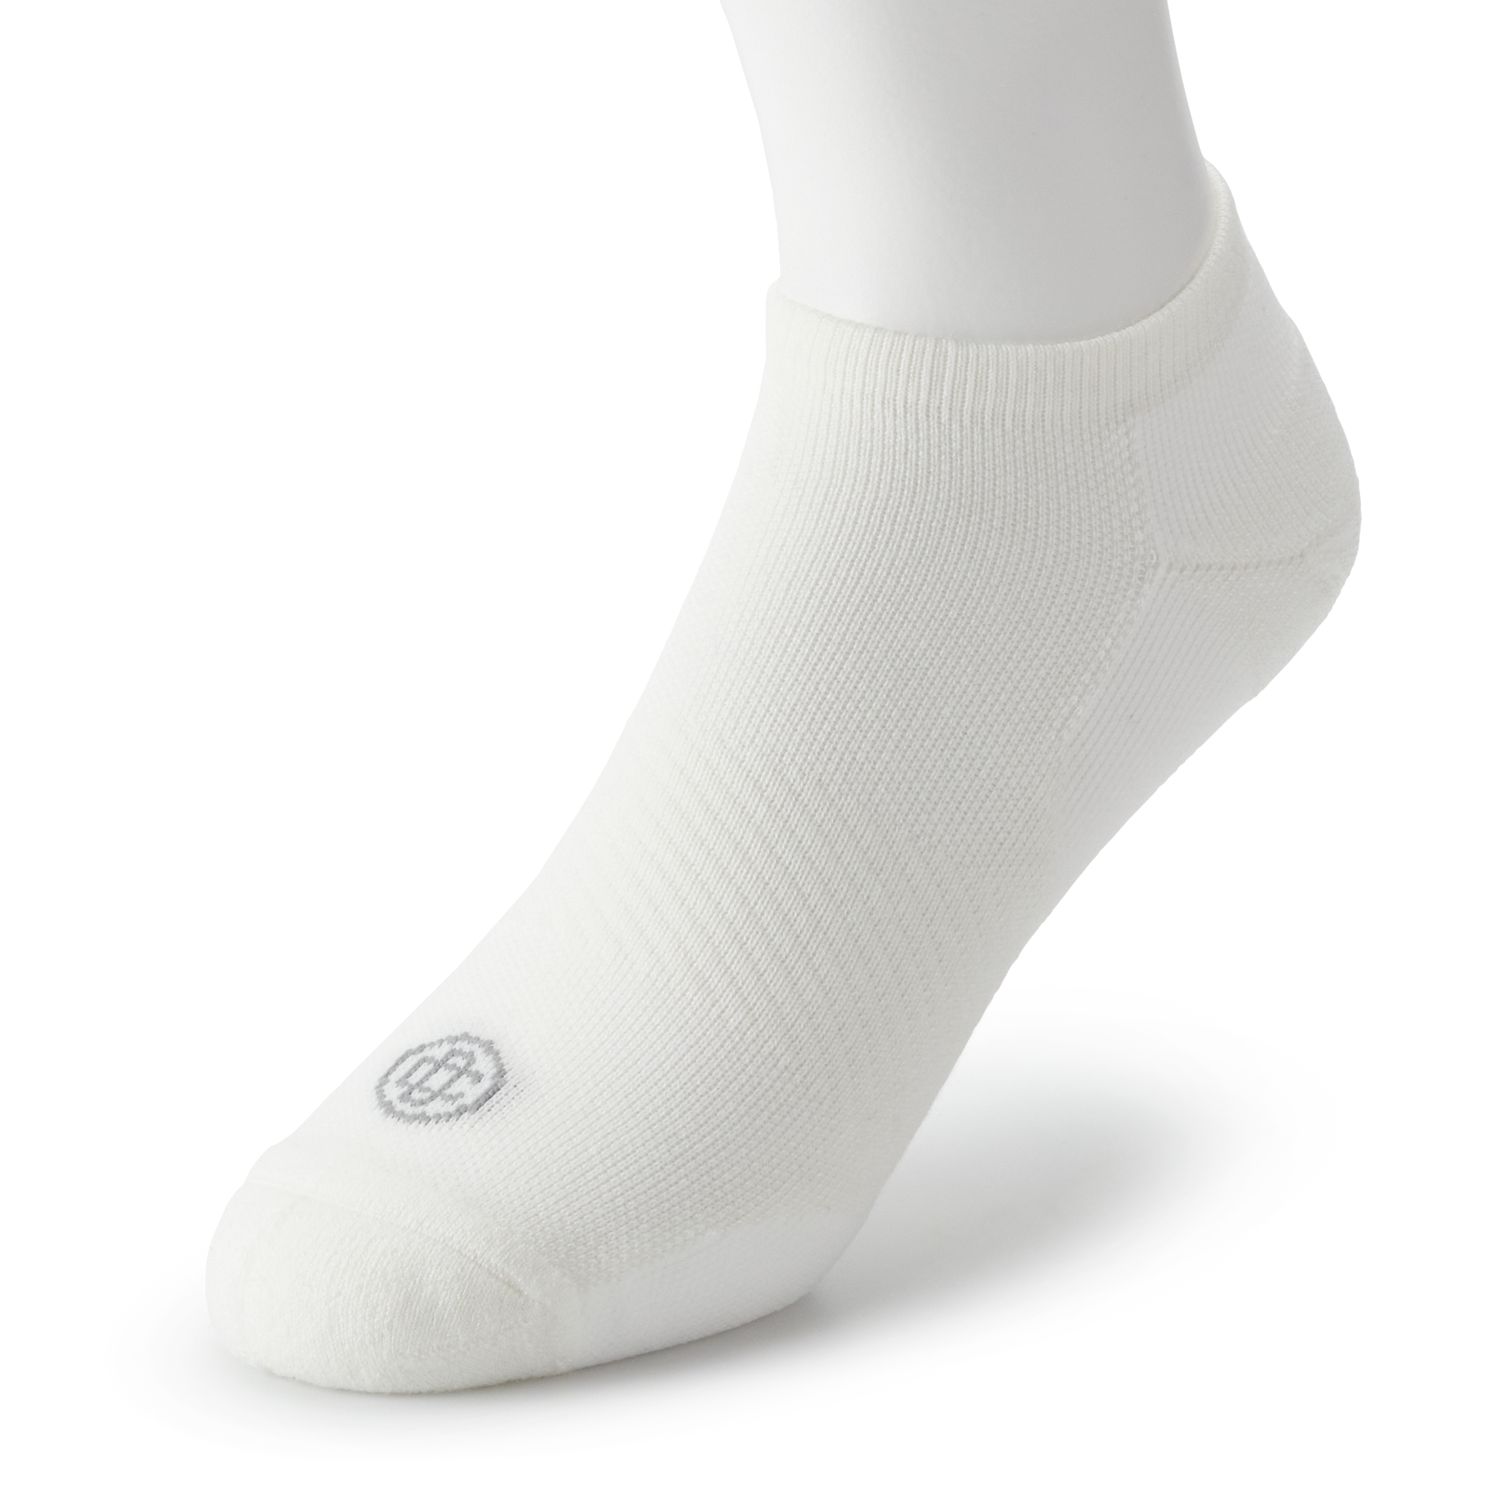 Image for Dr. Choice Men's Doctor's Choice Plantar Fasciitis No-Show Socks at Kohl's.